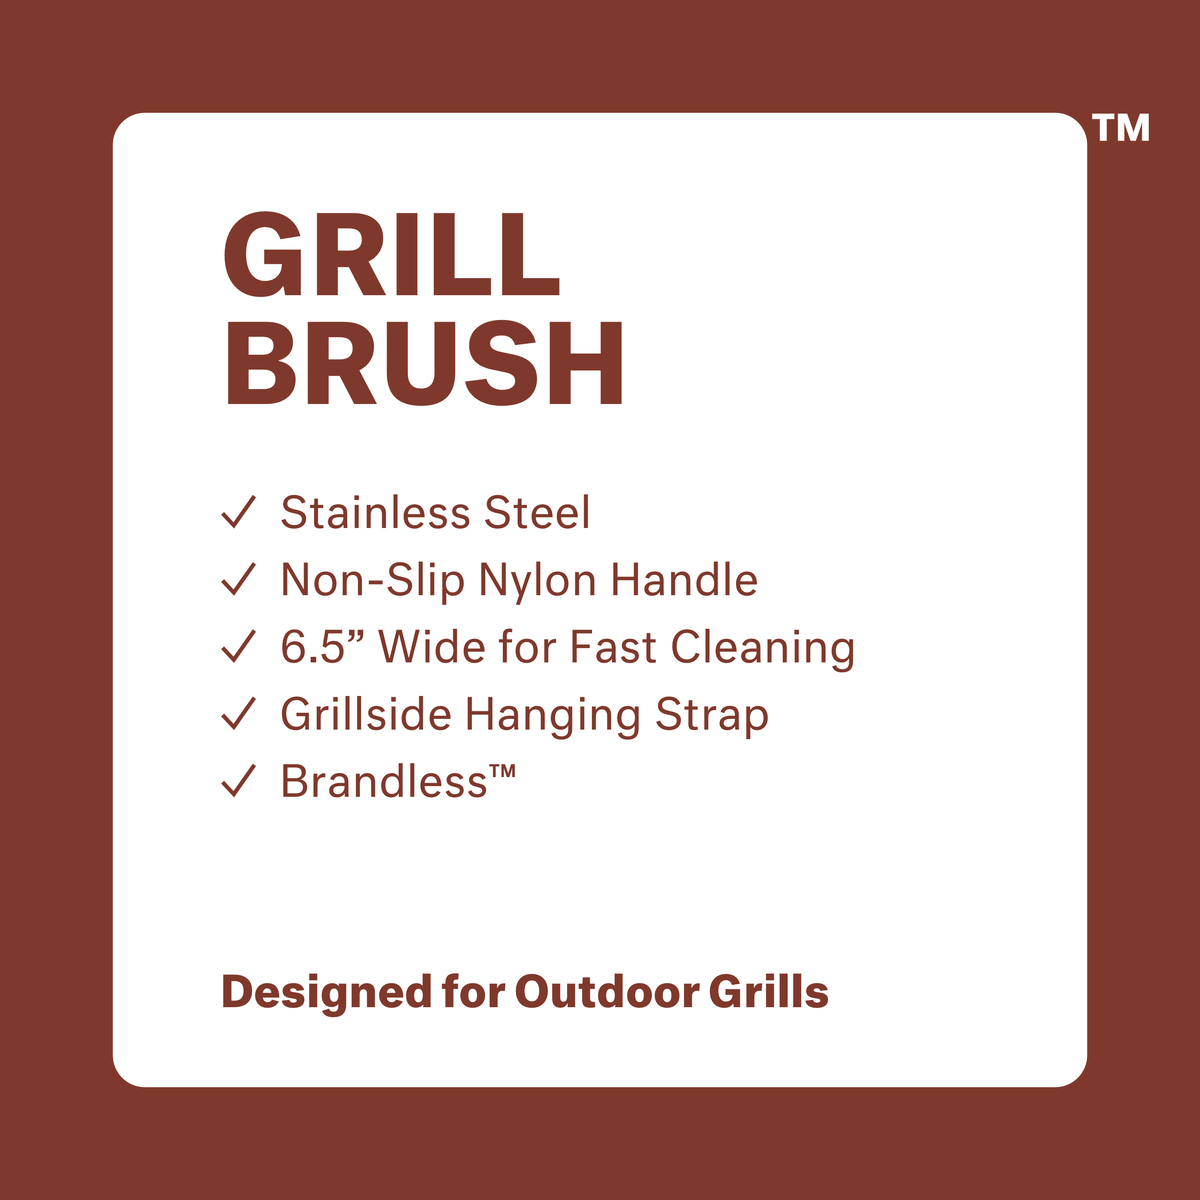 Grill Brush. Stainless steel. Non-slip nylon handle. 6.5&quot; wide for fast cleaning. Grillside hanging strap. Brandless. Designed for outdoor grills.